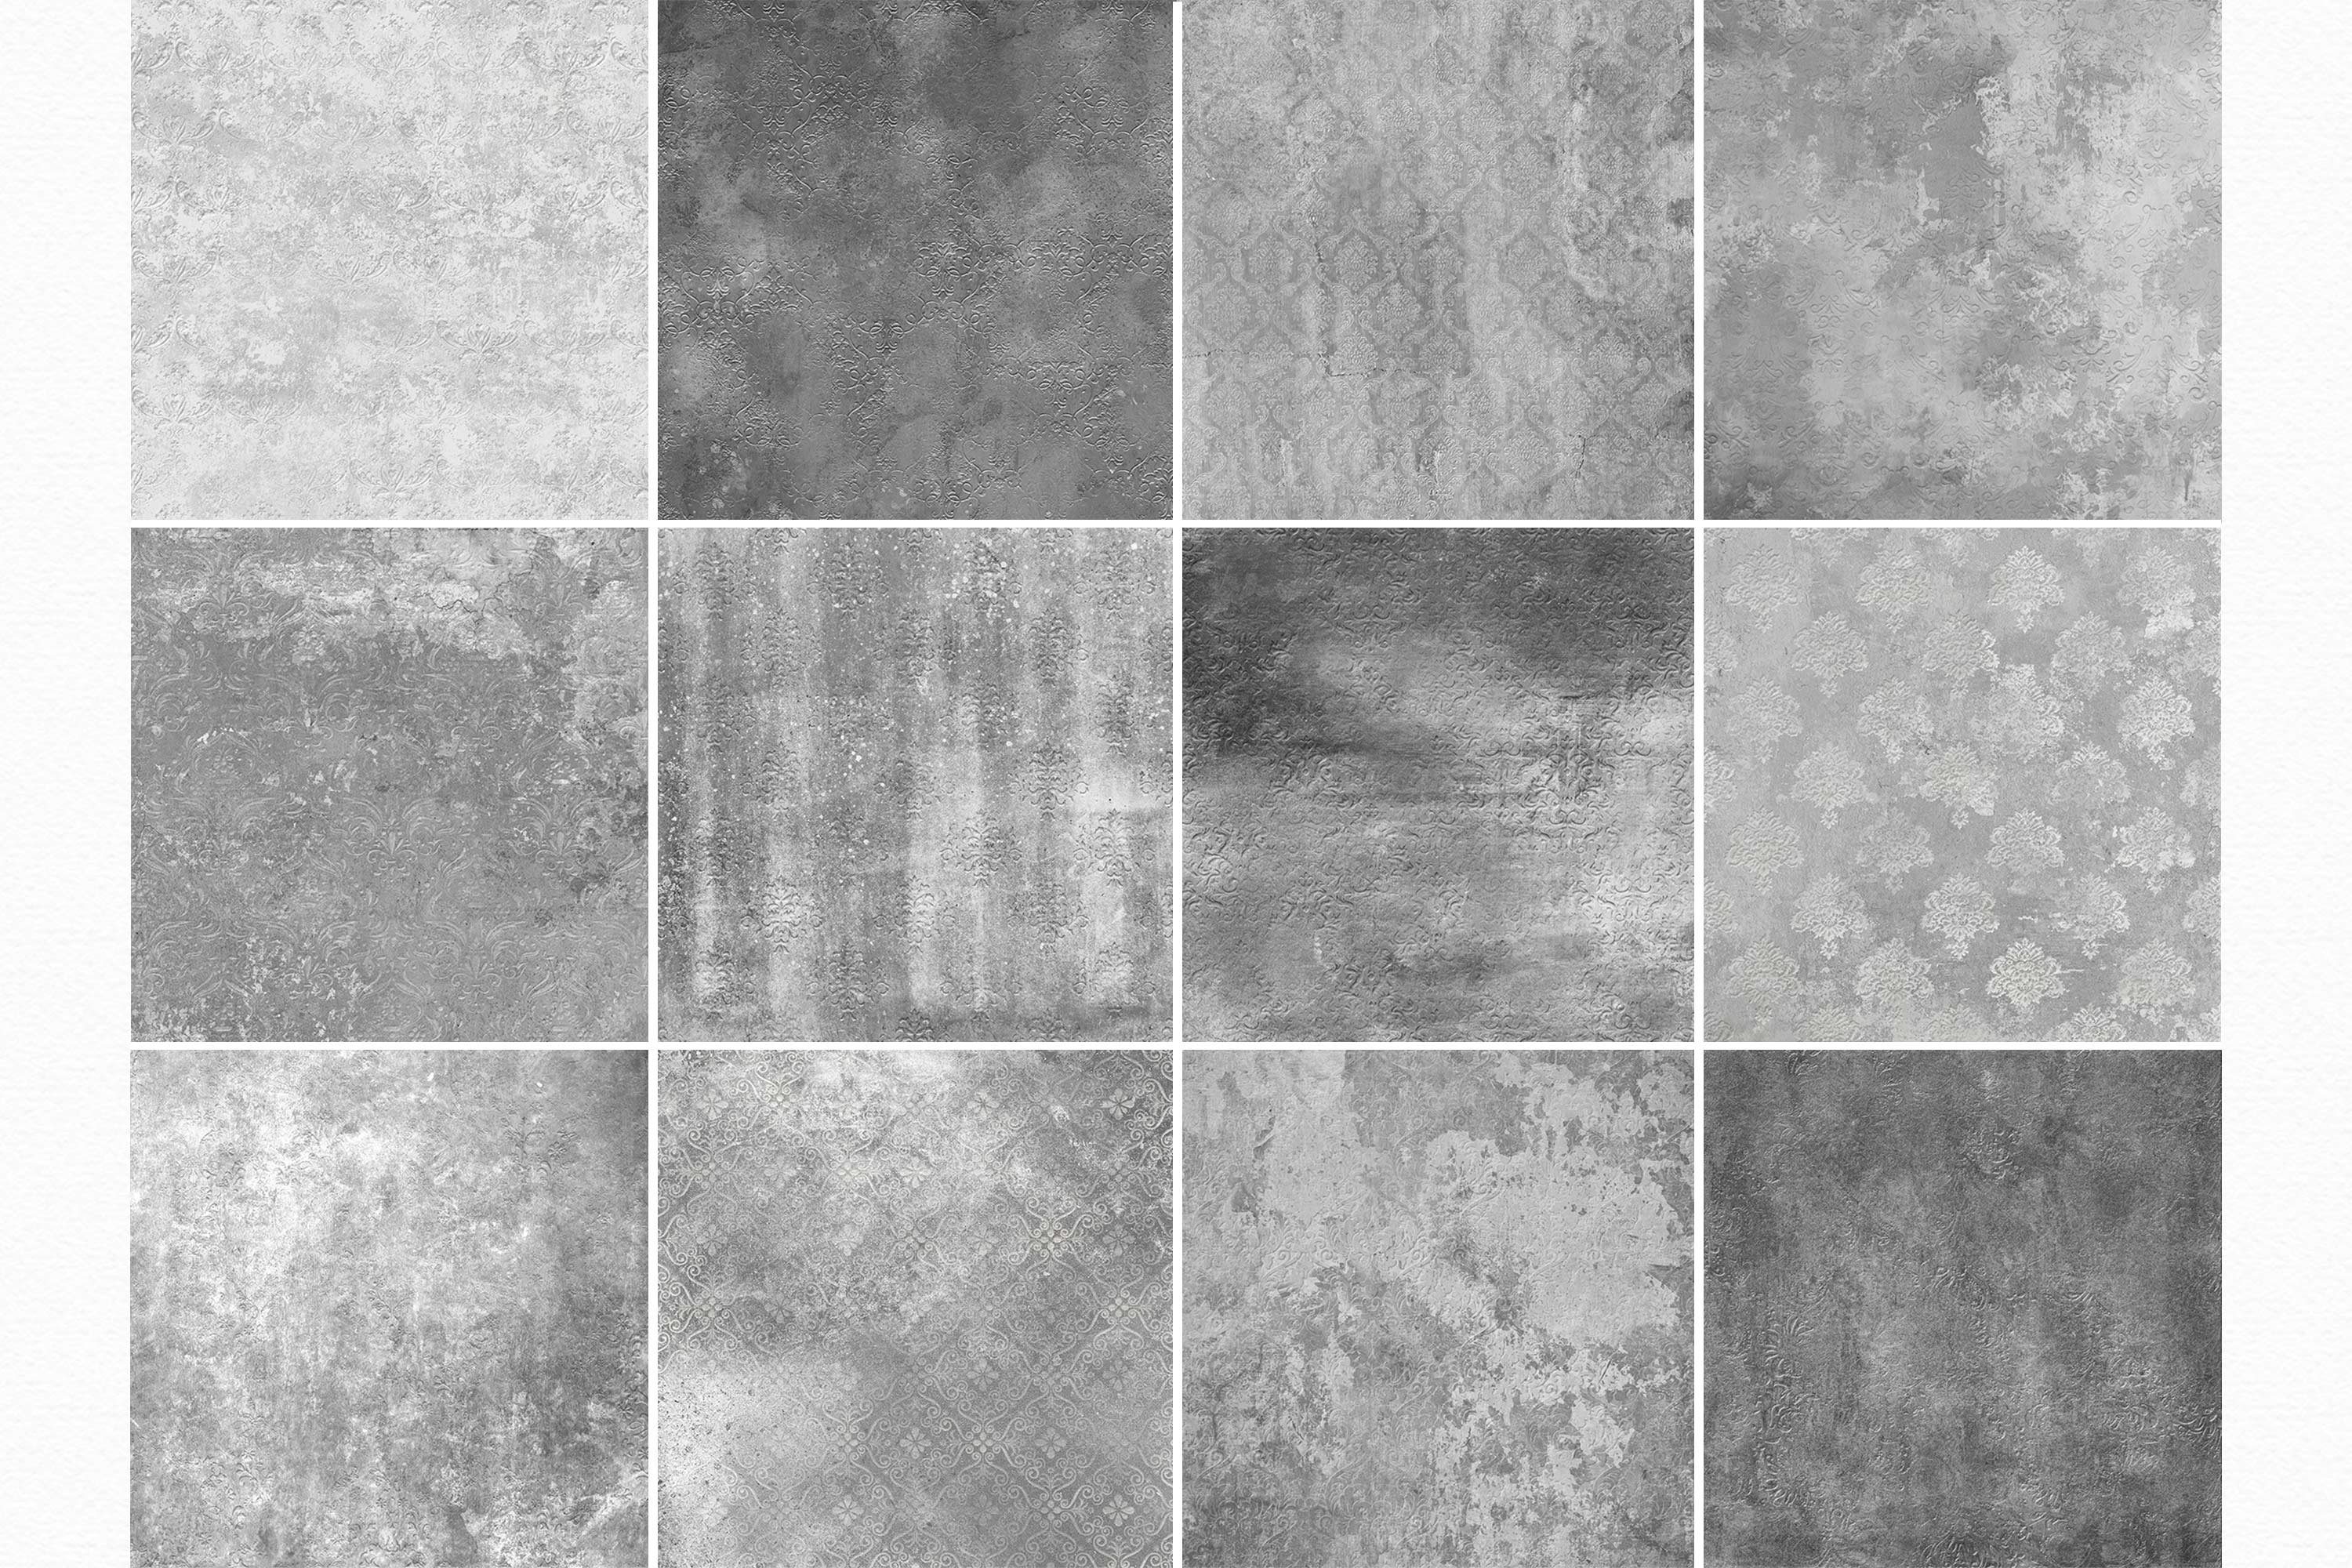 Distressed Damask Concrete Textures preview image.